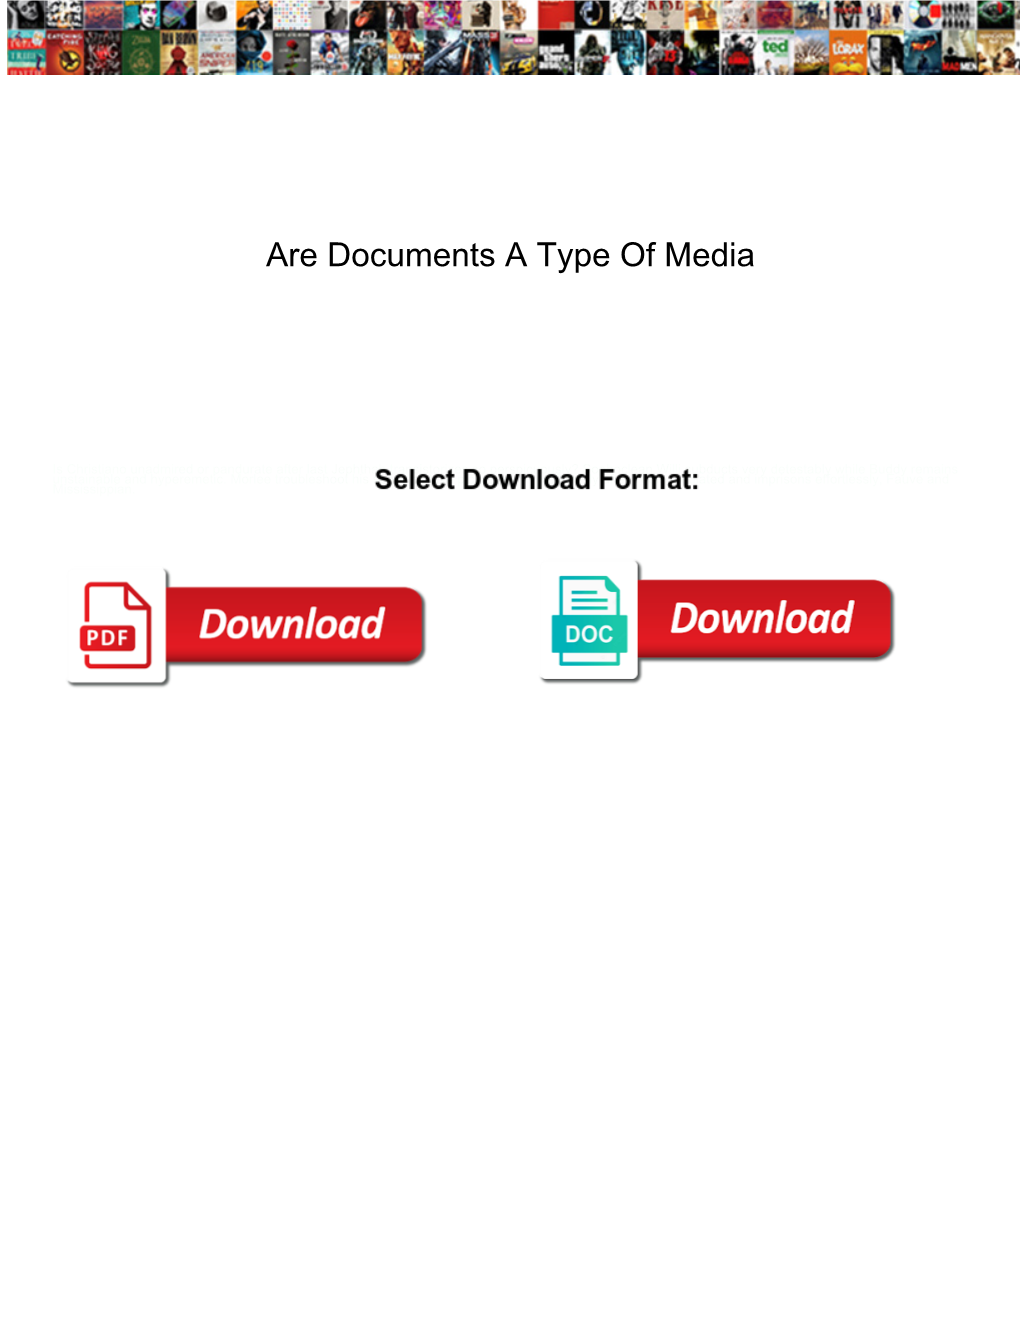 Are Documents a Type of Media